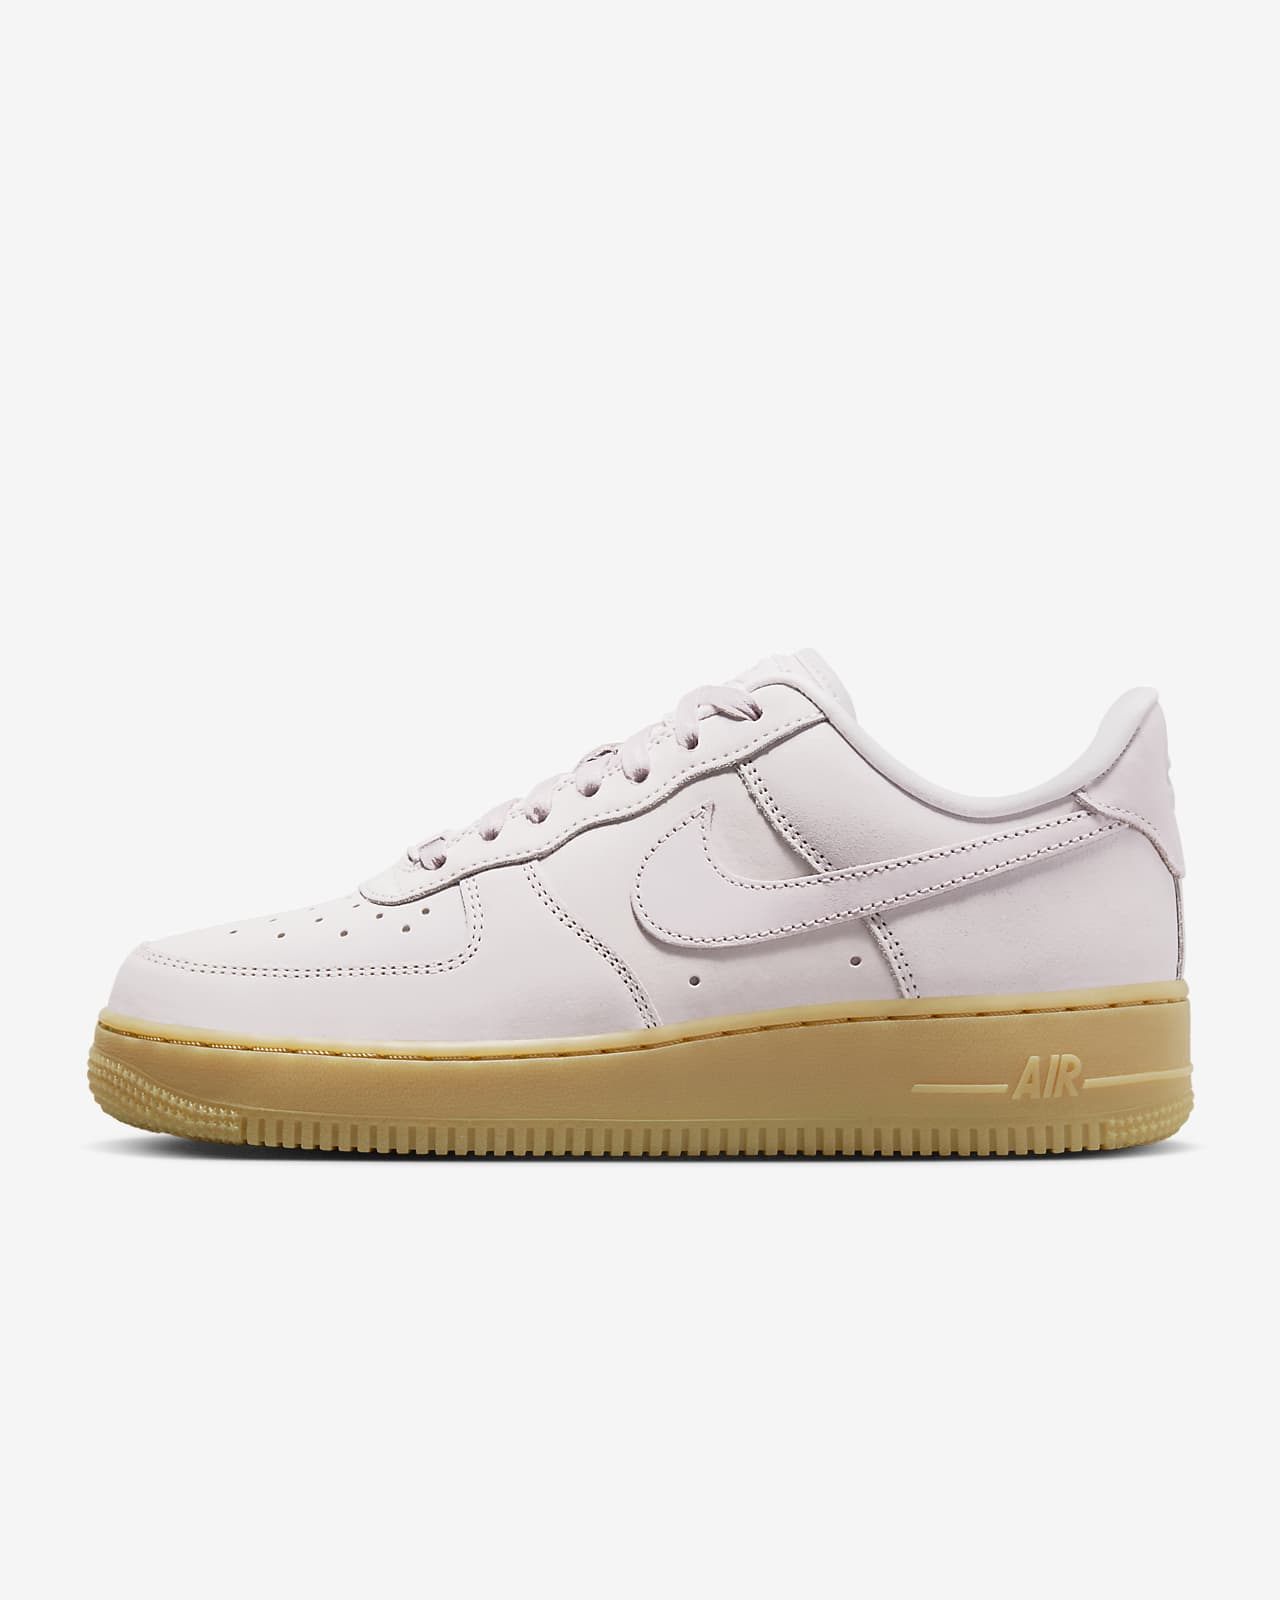 Nike Air Force 1 Premium Womens Shoes Review